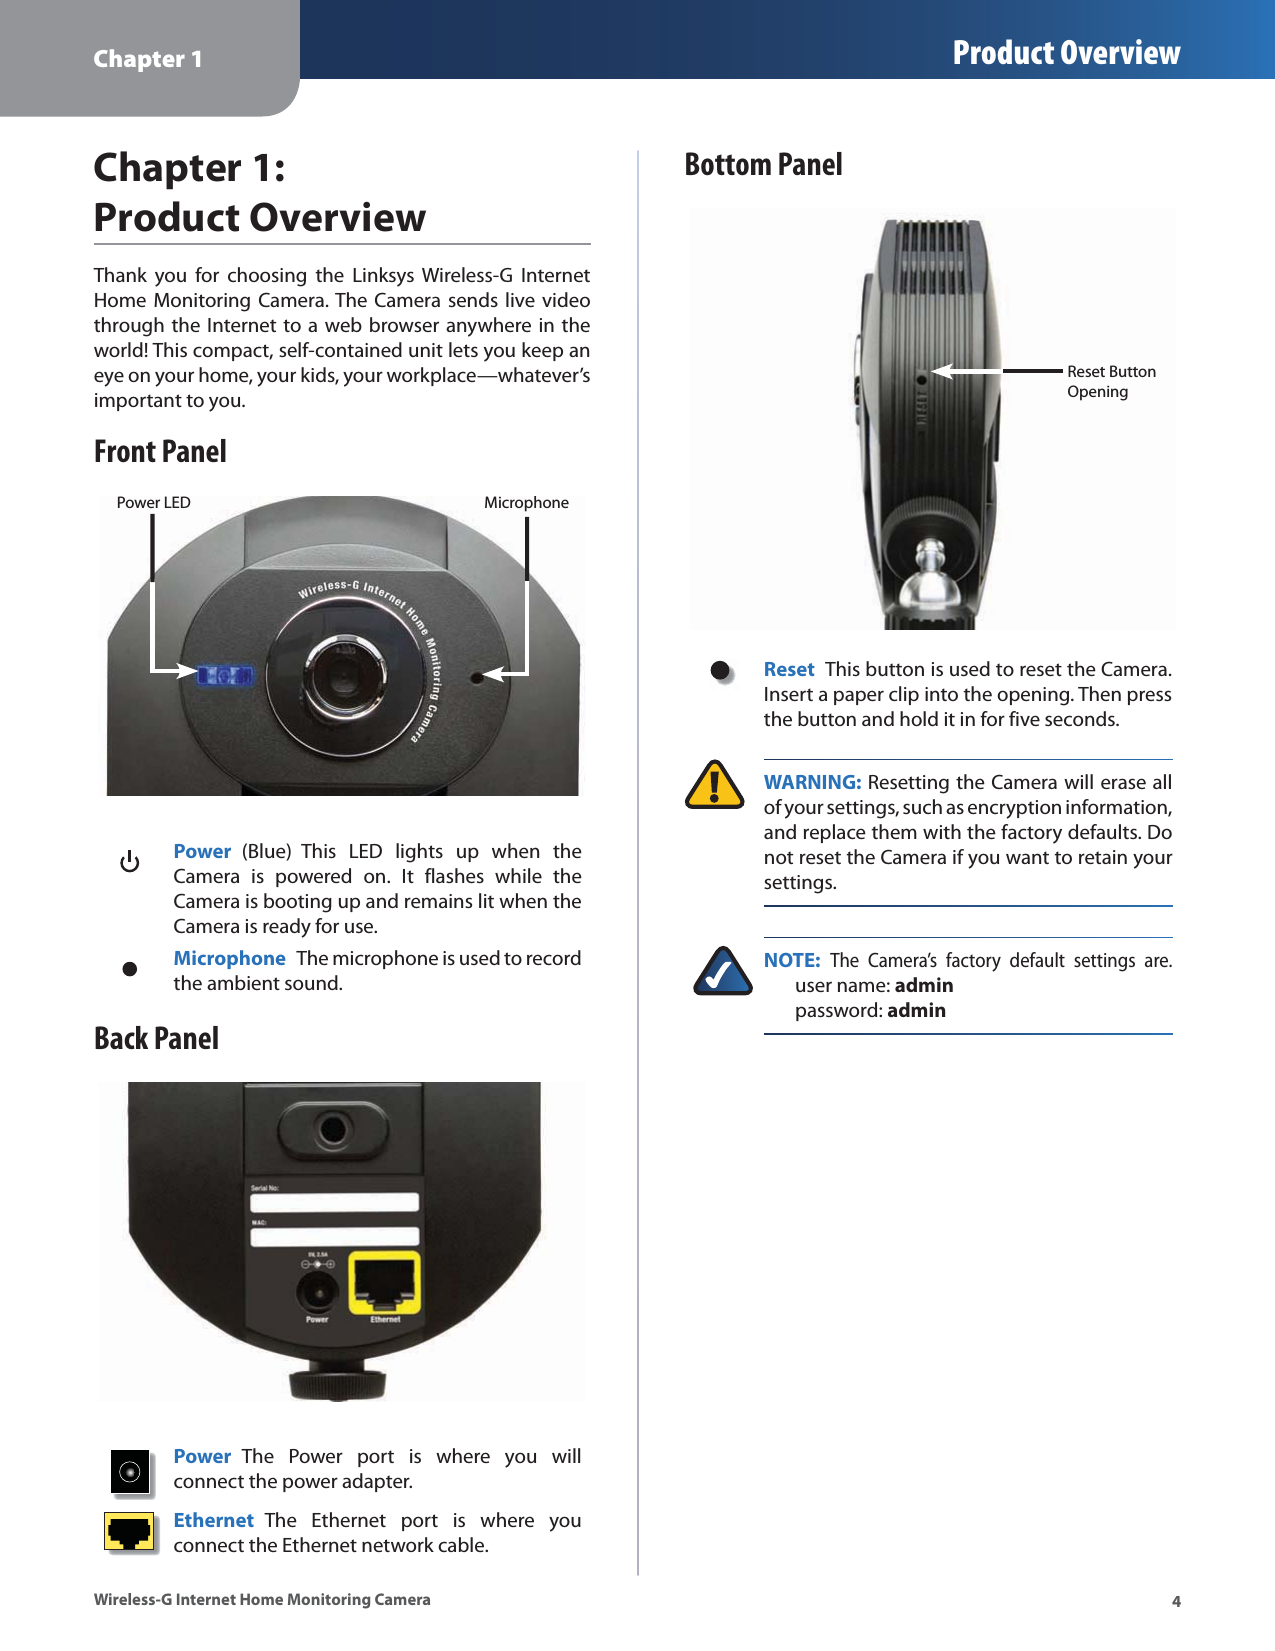 Chapter 1 Product Overview4Wireless-G Internet Home Monitoring CameraChapter 1:  Product OverviewThank you for choosing the Linksys Wireless-G Internet Home Monitoring Camera. The Camera sends live video through the Internet to a web browser anywhere in the world! This compact, self-contained unit lets you keep an eye on your home, your kids, your workplace—whatever’s important to you. Front PanelPower LED MicrophonePower  (Blue) This LED lights up when the Camera is powered on. It flashes while the Camera is booting up and remains lit when the Camera is ready for use.Microphone  The microphone is used to record the ambient sound. Back PanelPower  The Power port is where you will connect the power adapter.Ethernet  The Ethernet port is where you connect the Ethernet network cable.Bottom PanelReset Button OpeningReset  This button is used to reset the Camera. Insert a paper clip into the opening. Then press the button and hold it in for five seconds. WARNING: Resetting the Camera will erase all of your settings, such as encryption information, and replace them with the factory defaults. Do not reset the Camera if you want to retain your settings.NOTE: The Camera’s factory default settings are.  user name: admin     password: admin